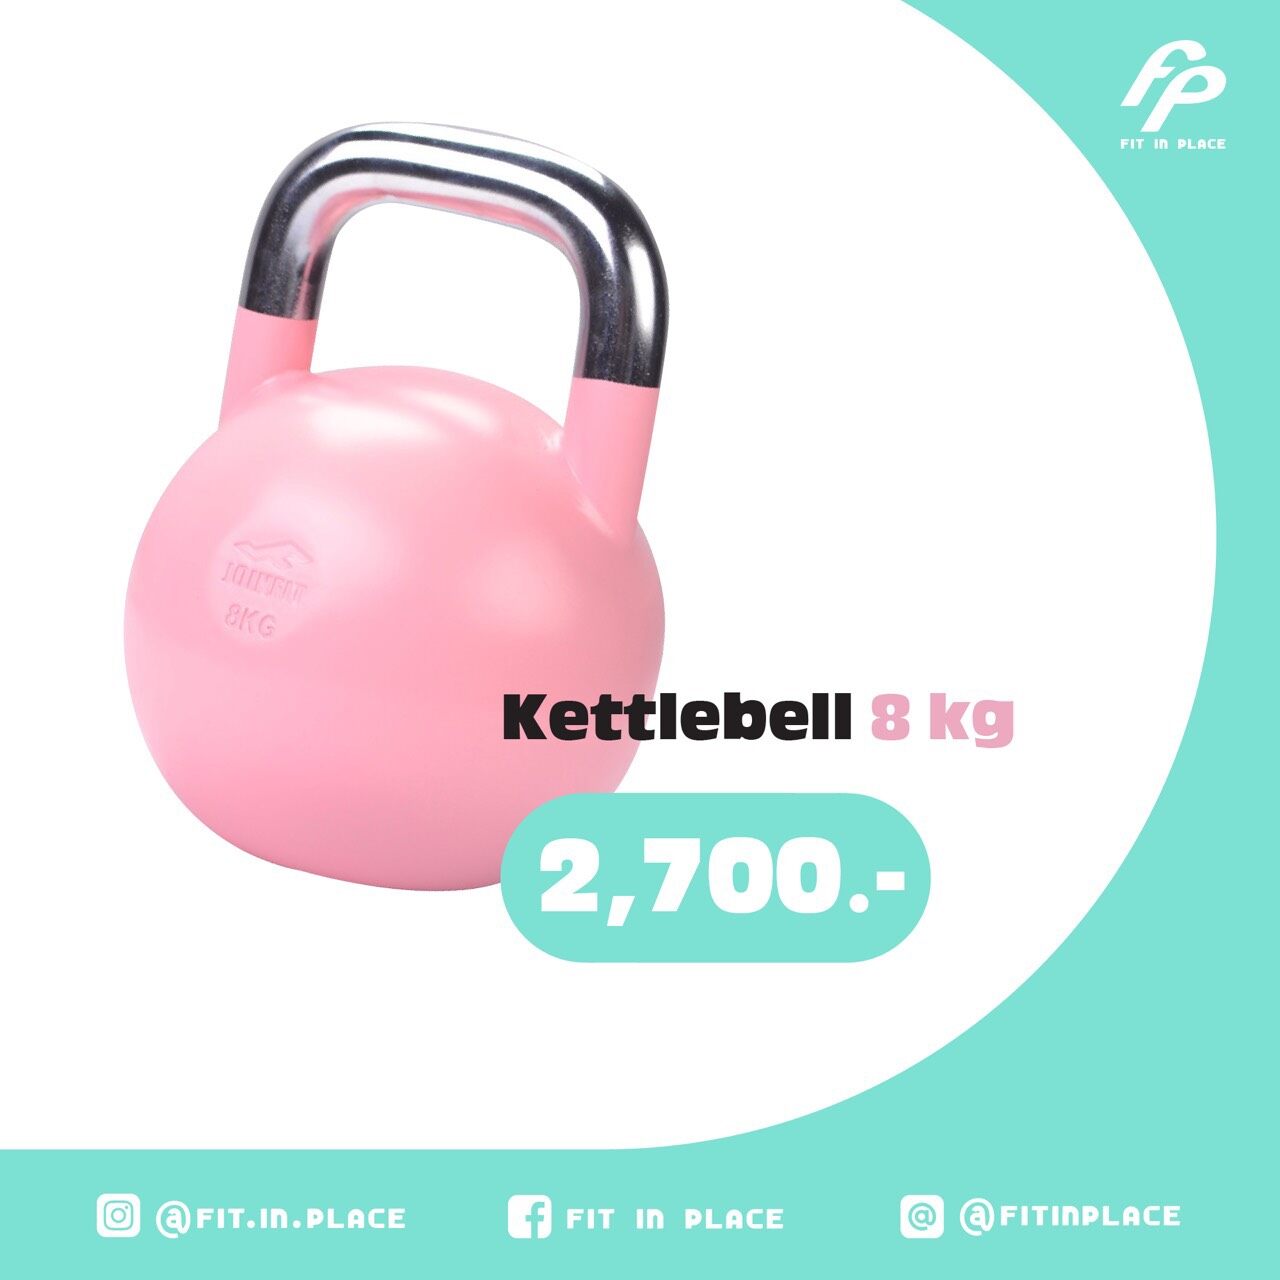 Fit in Place - Joinfit Kettlebell 8kg